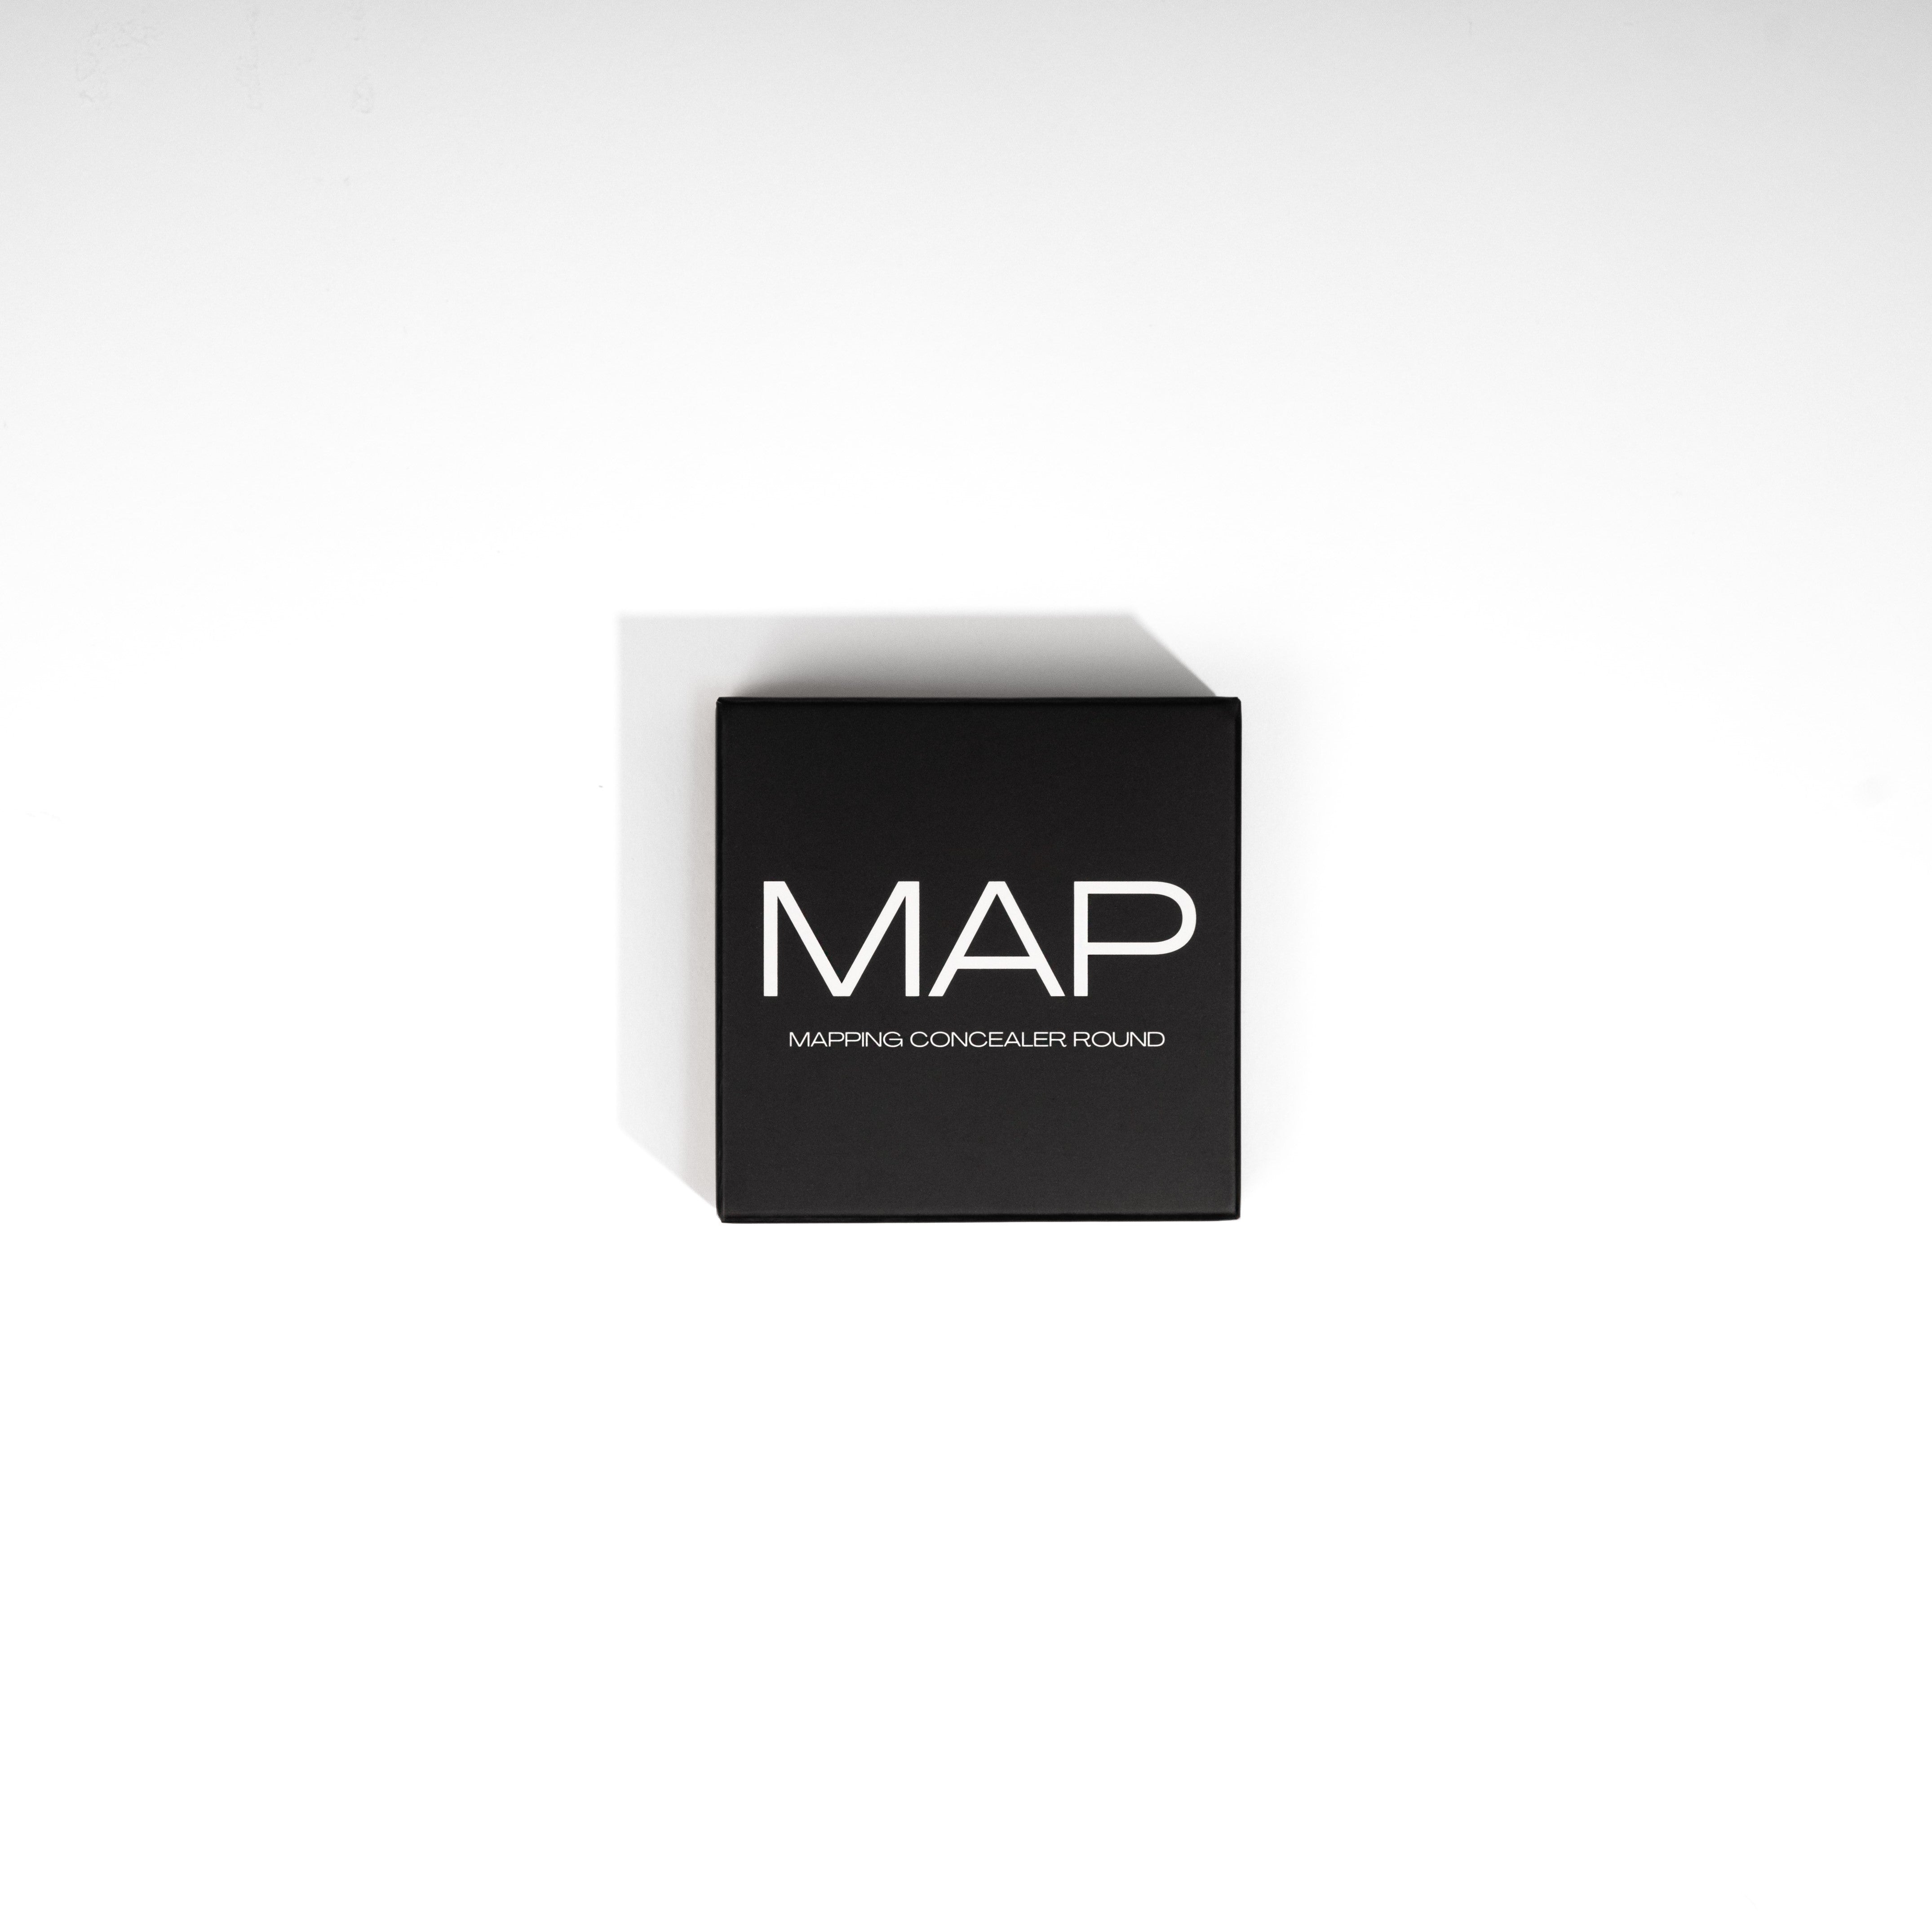 MAP - Mapping Concealer Round